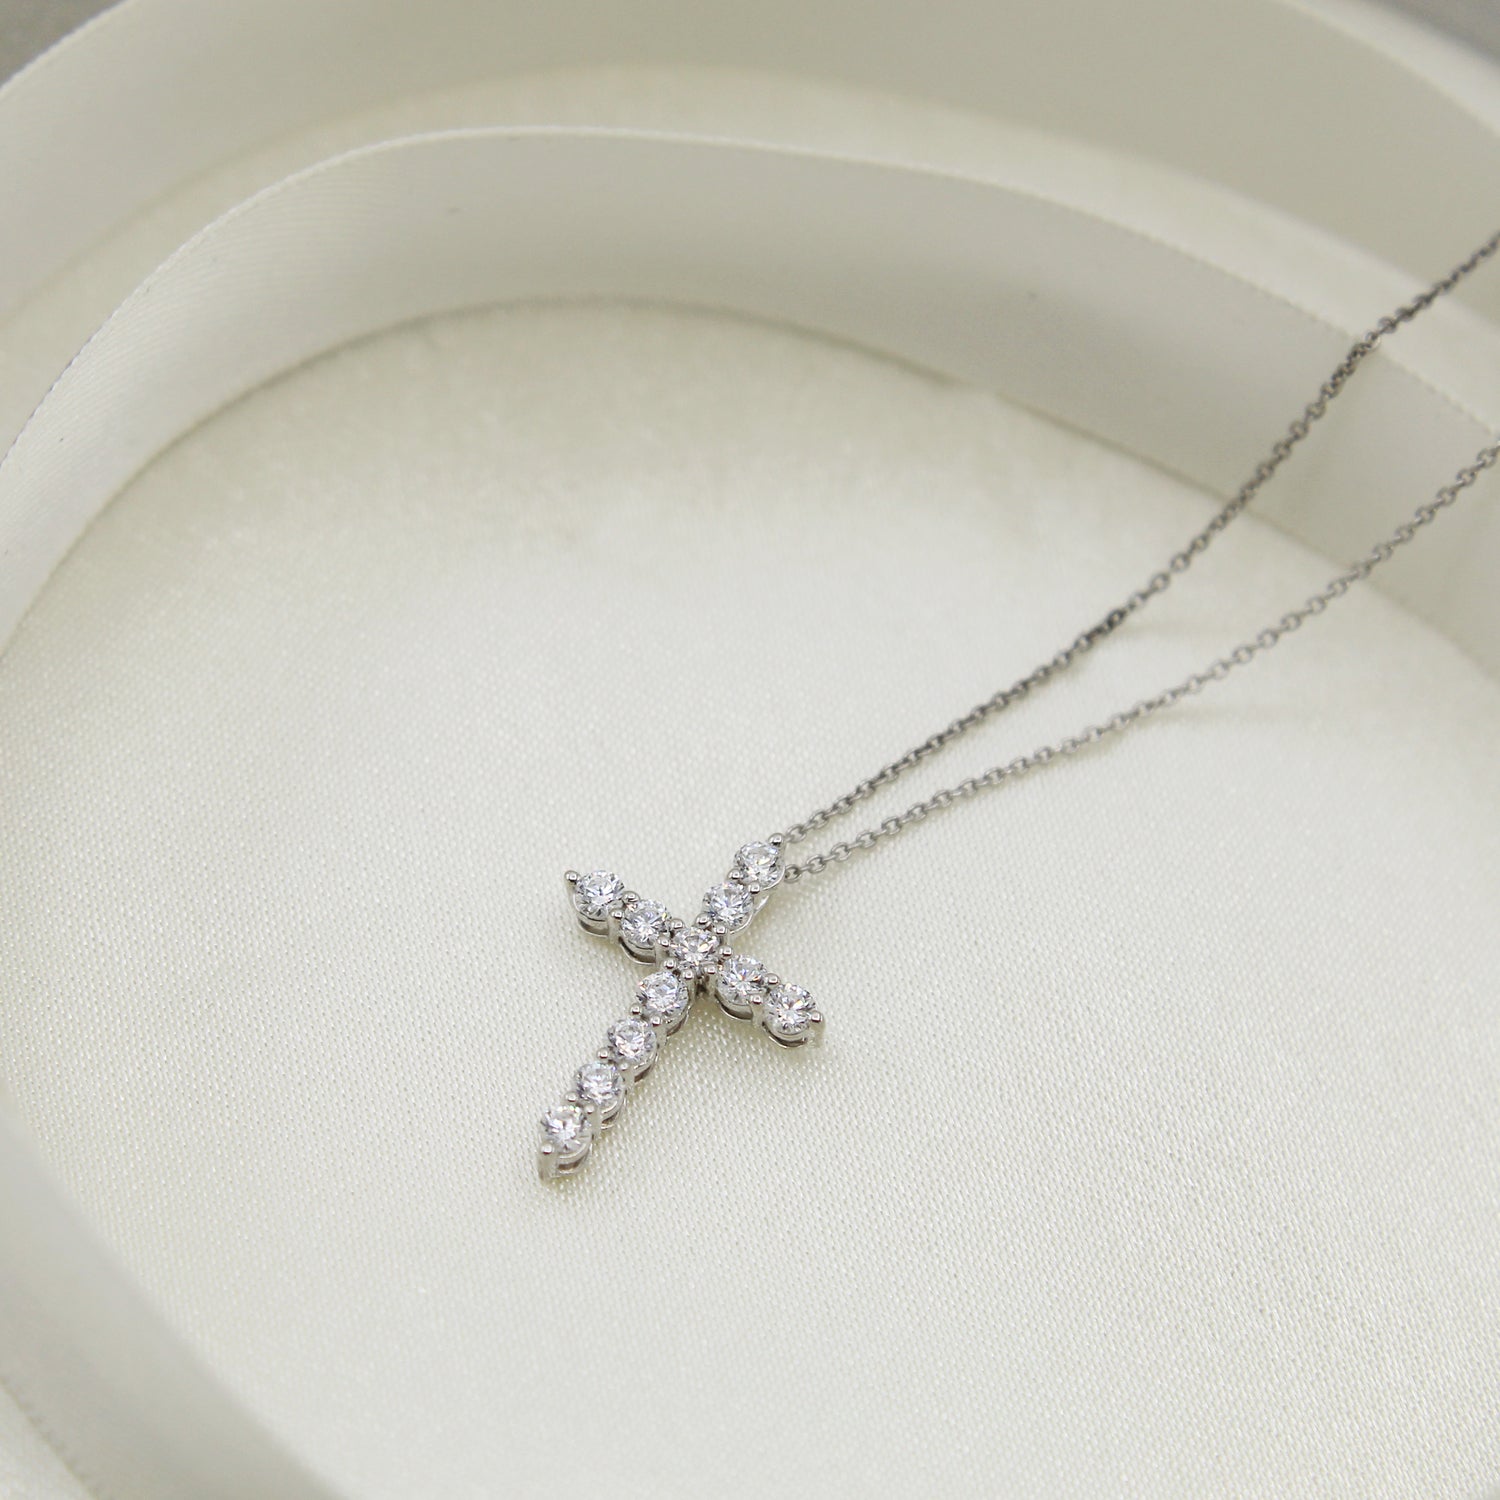 cross diamond natural pendant necklace jewelry affordable gift birthday 